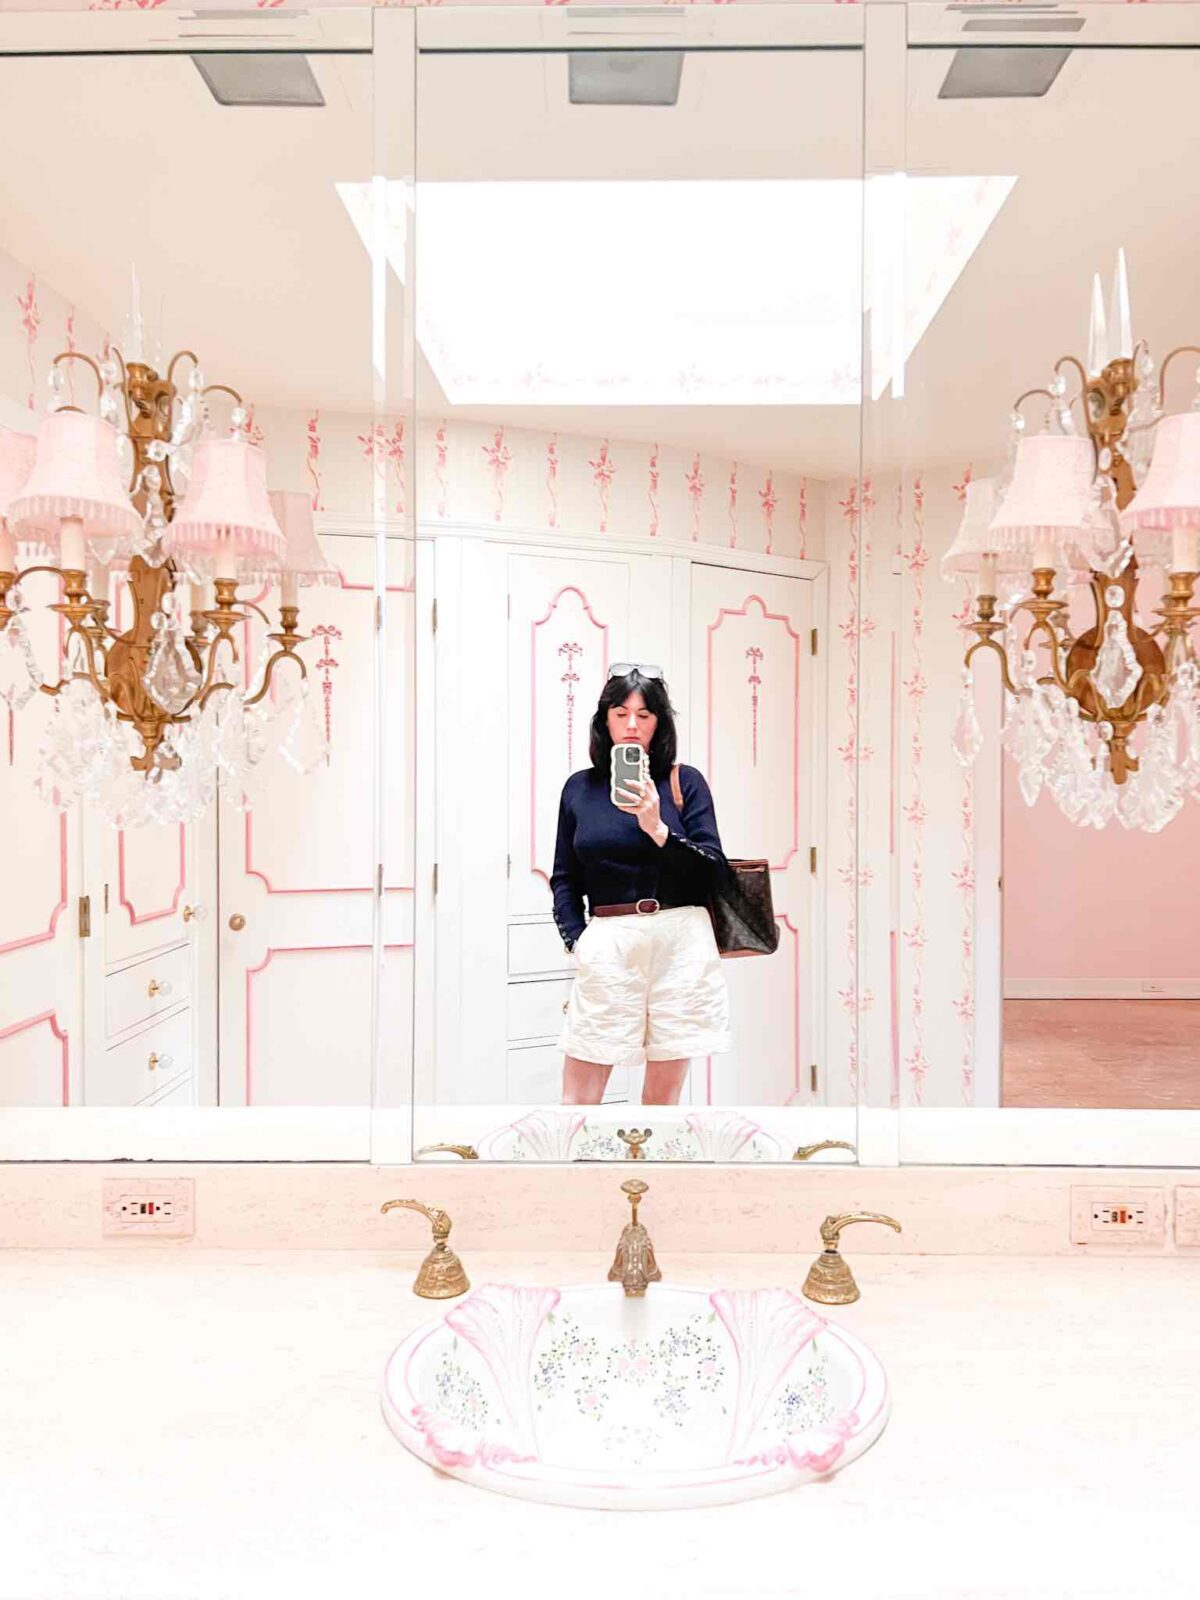 Bathroom with pink design details on the wallpaper and woodwork, ornate gold sconces, and a skylight